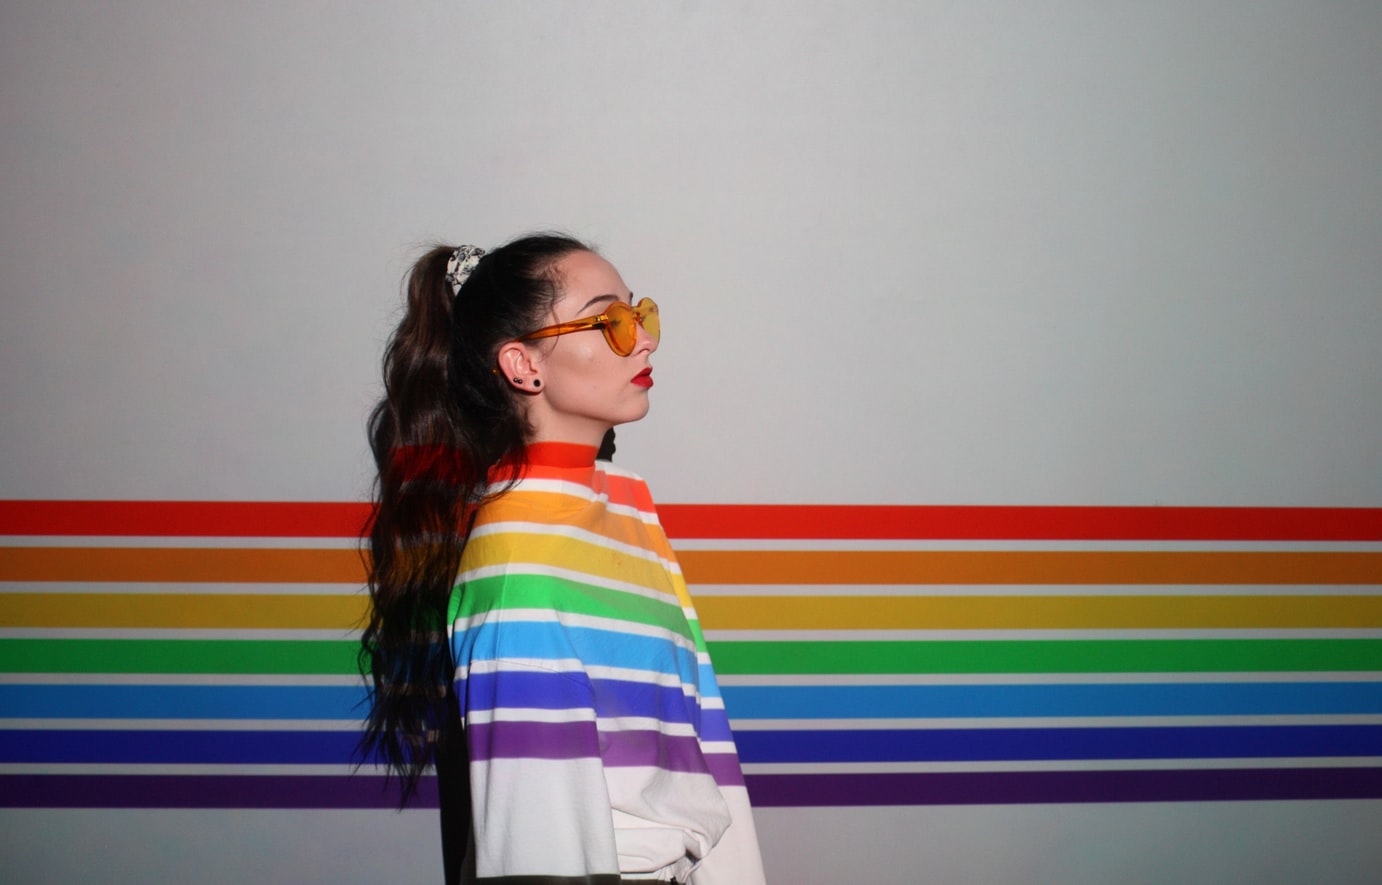 Profile of a girl with long hair and glasses wearing a white jacket with rainbow stripes on, blending into a rainbow stripe background.